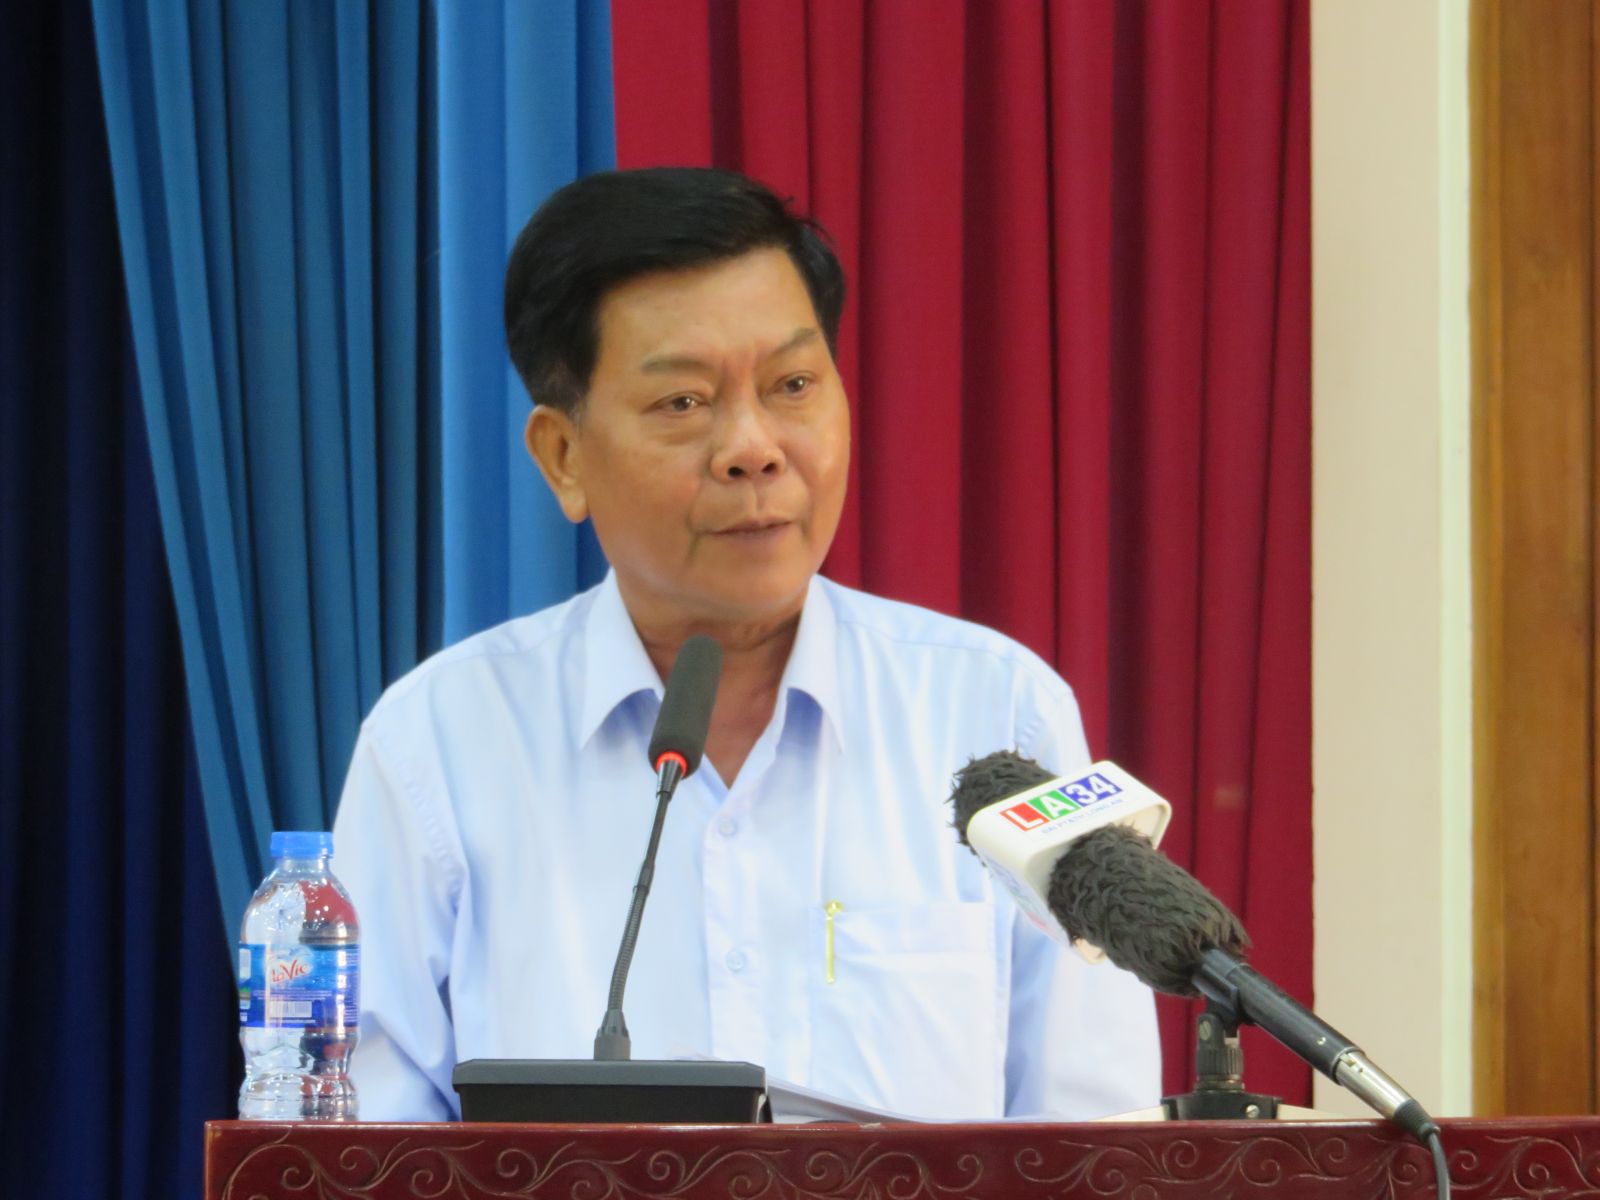 Deputy Secretary of the provincial Party Committee, Chairman of Long An provincial People's Committee - Tran Van Can stressed that the provincial leaders’ general viewpoint in the process of solving difficulties and obstacles of enterprises is according to the law, fair and harmony with benefits among relevant parties.